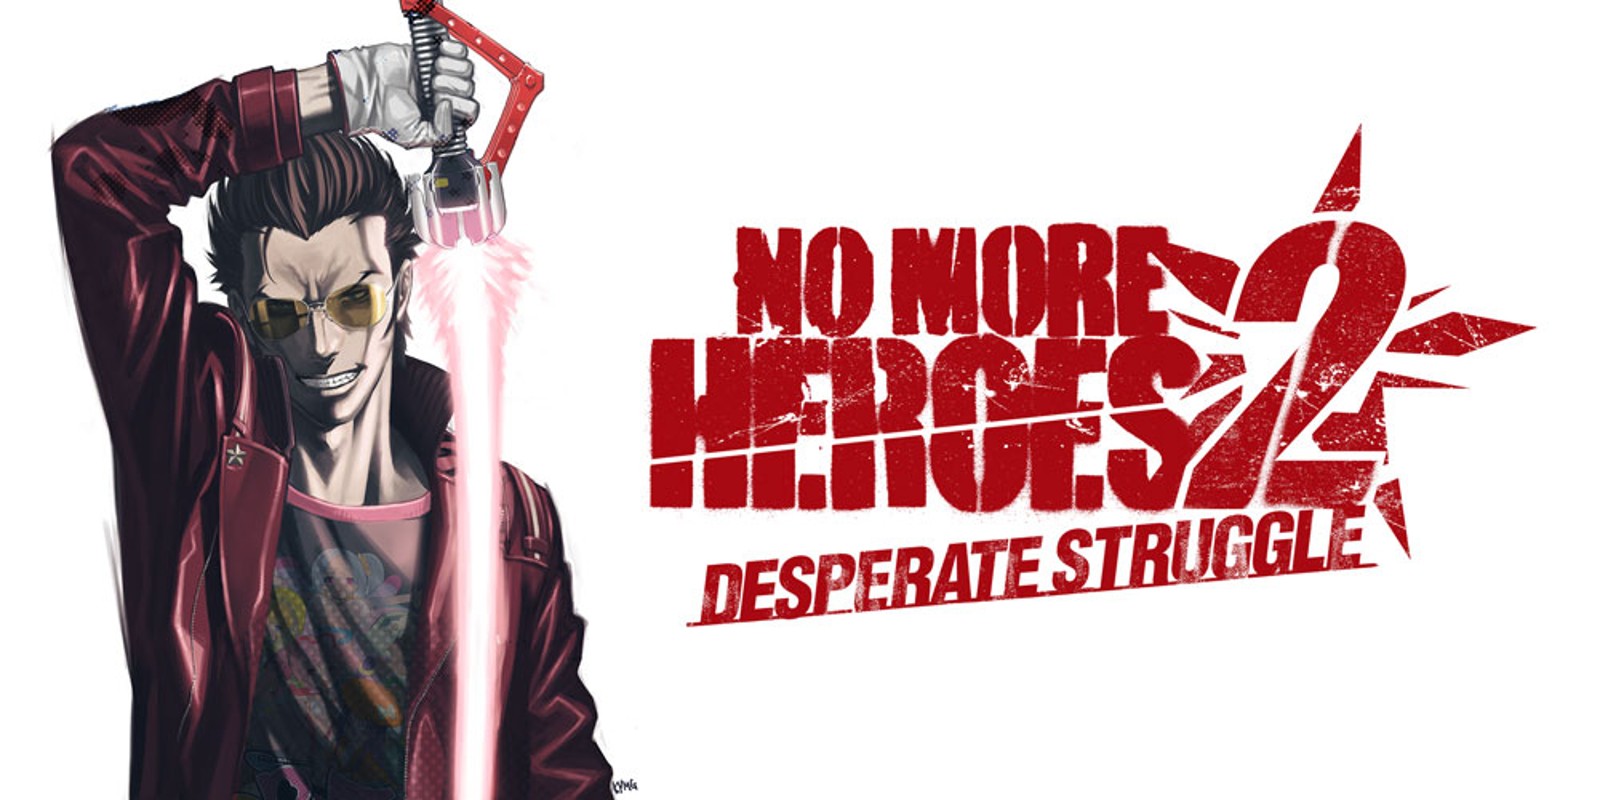 Last Retro Game You Finished And Your Thoughts - Page 13 SI_Wii_NoMoreHeroes2DesperateStruggle_image1600w